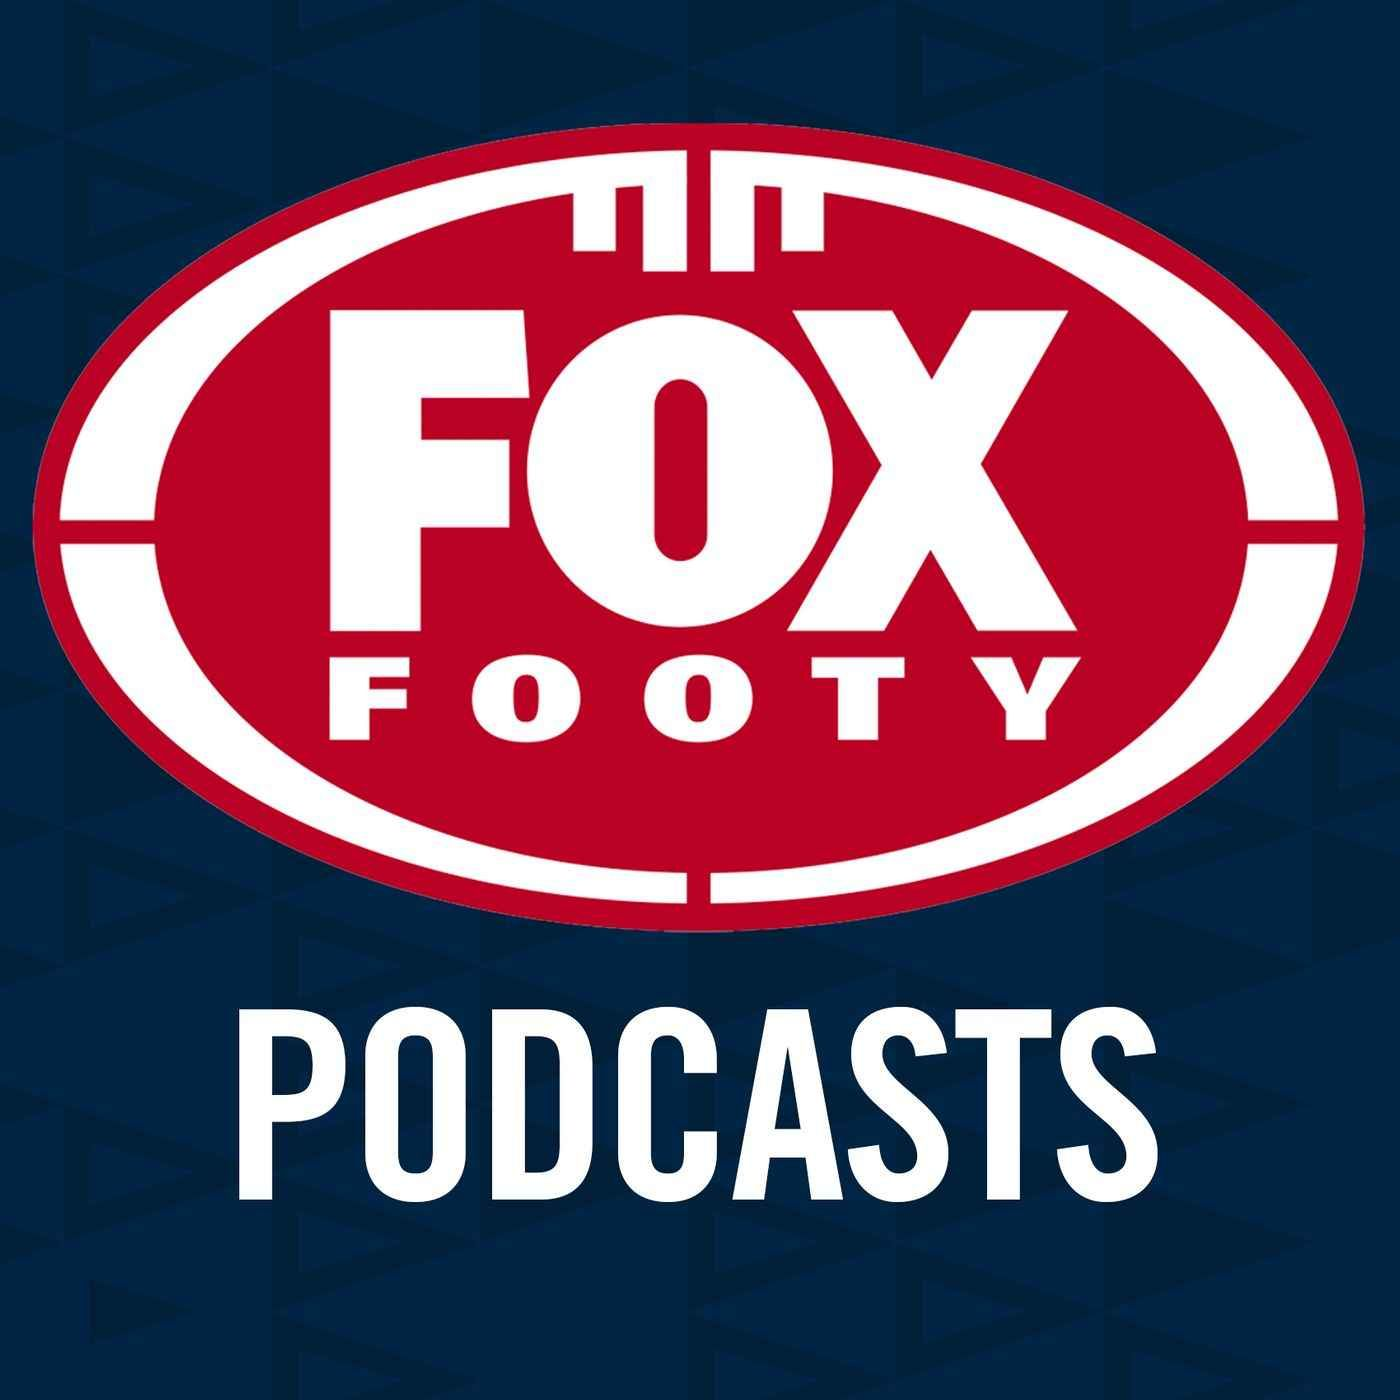 Fox Footy Podcast: Top 8 takes shape, Leon's Giant issue